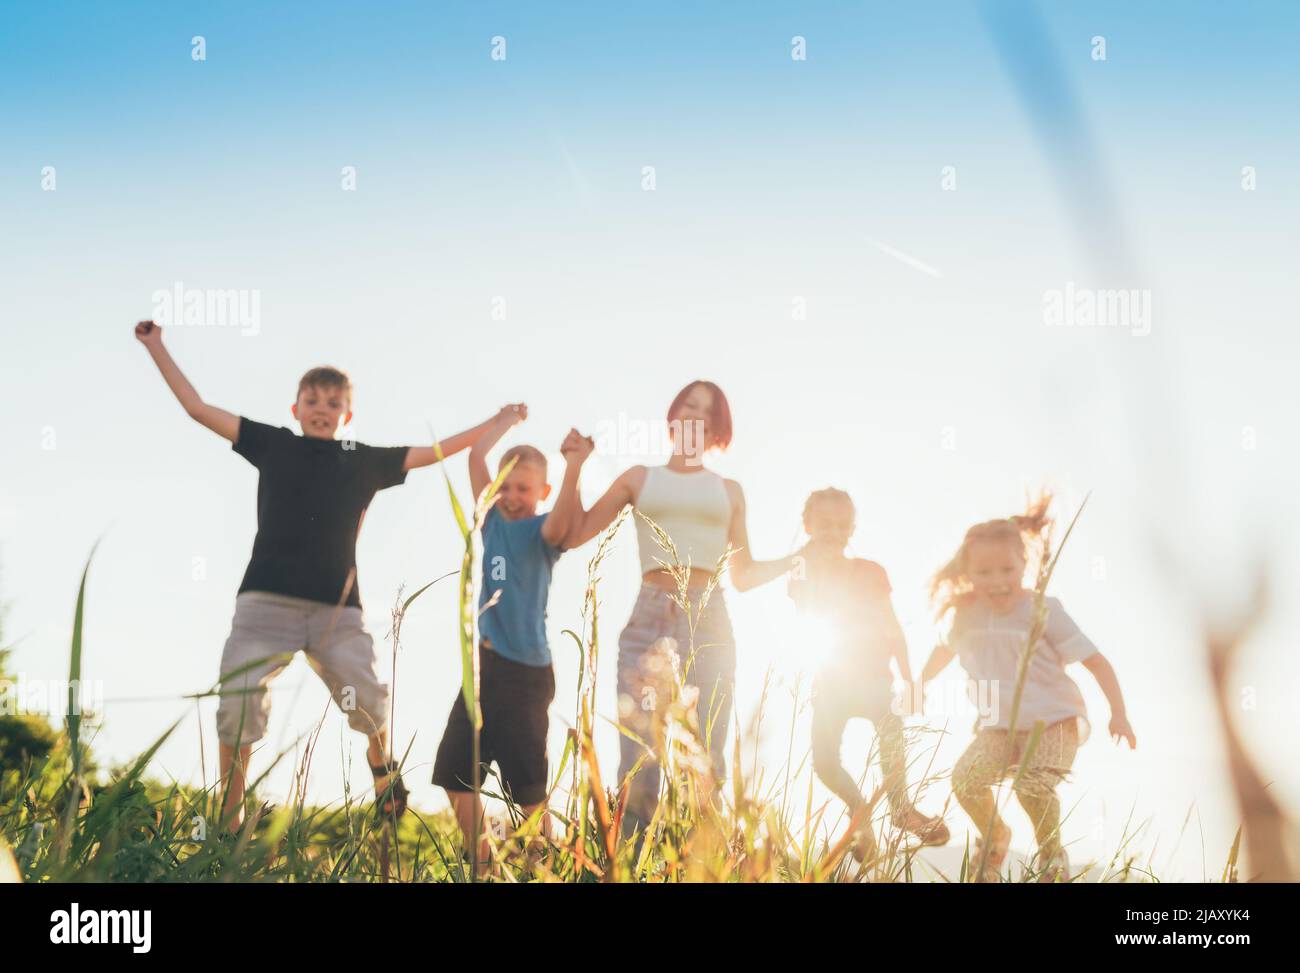 Selective focus brothers and sisters teenagers and little kids jumping holding hands in hands on the green grass meadow with an evening sunset backgro Stock Photo